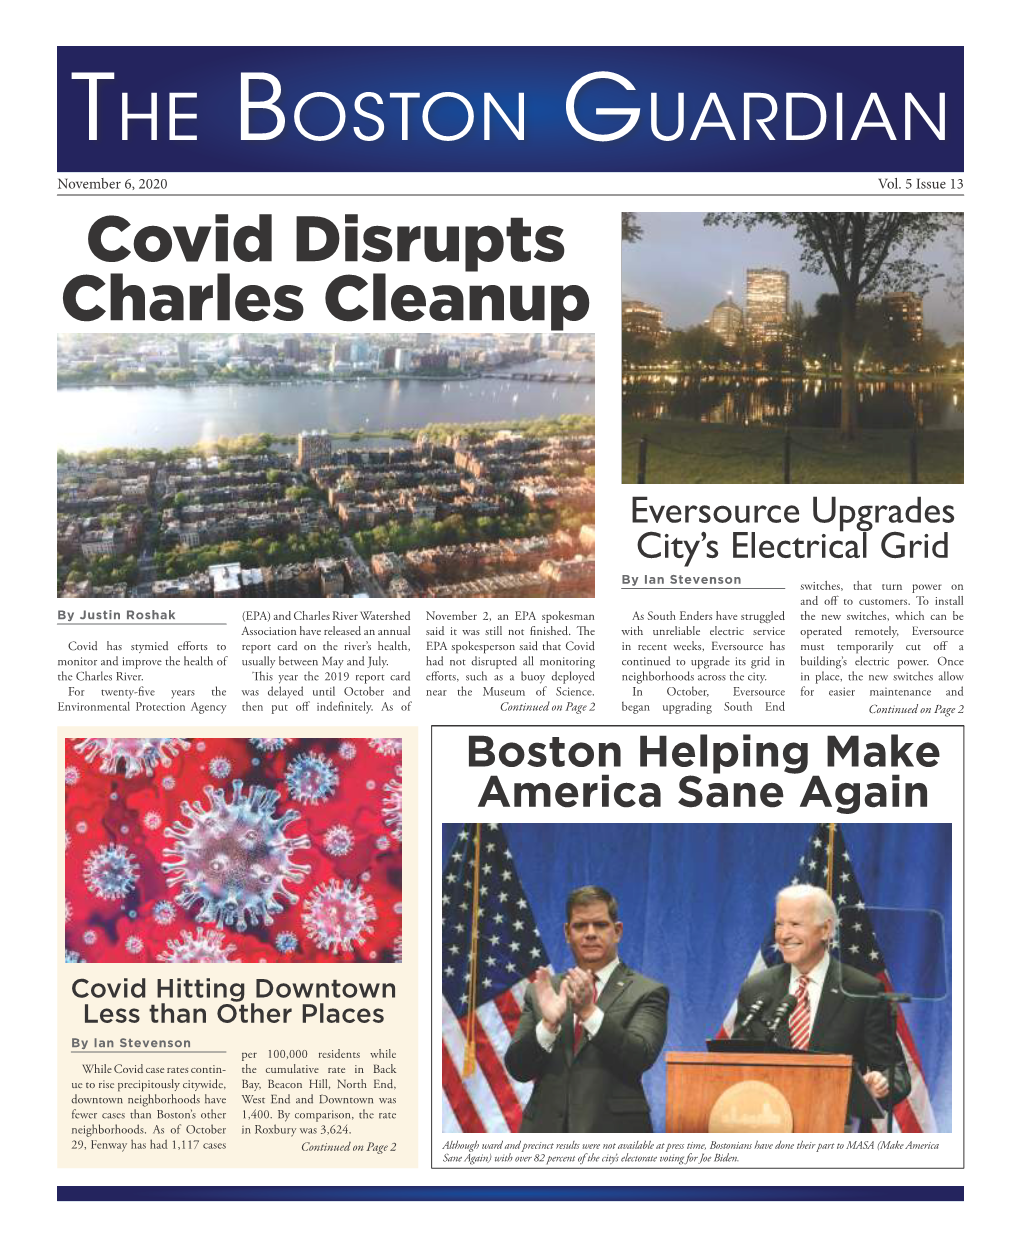 Covid Disrupts Charles Cleanup the BOSTON GUARDIAN